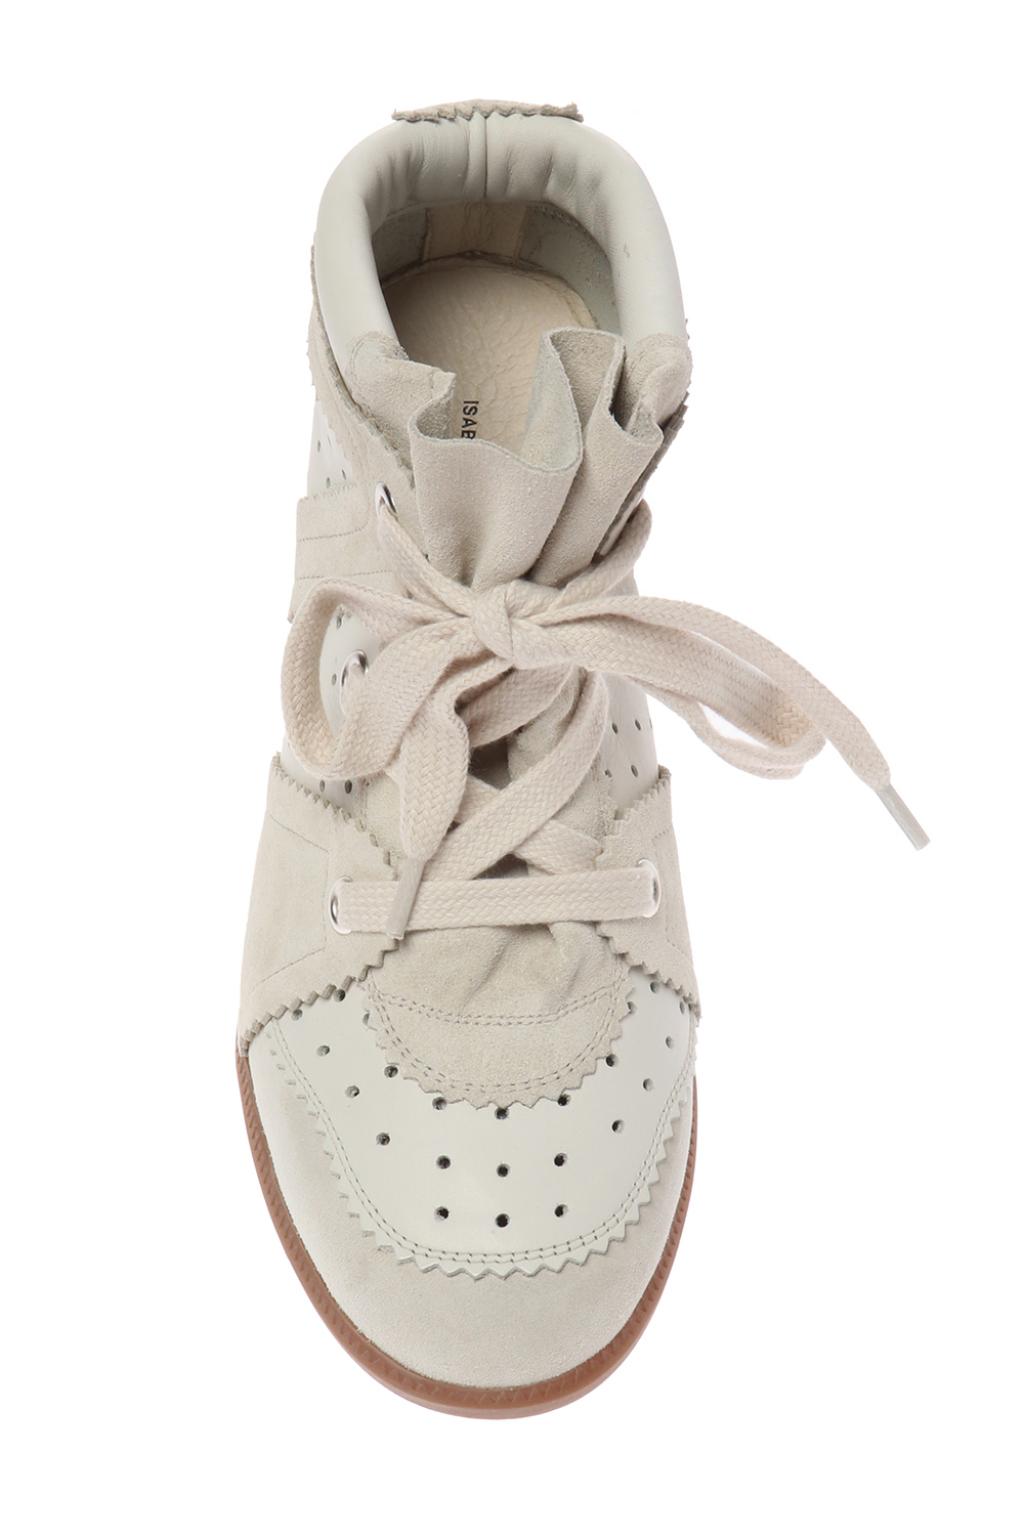 Isabel Marant 'Betty' high-top sneakers | Women's Shoes |